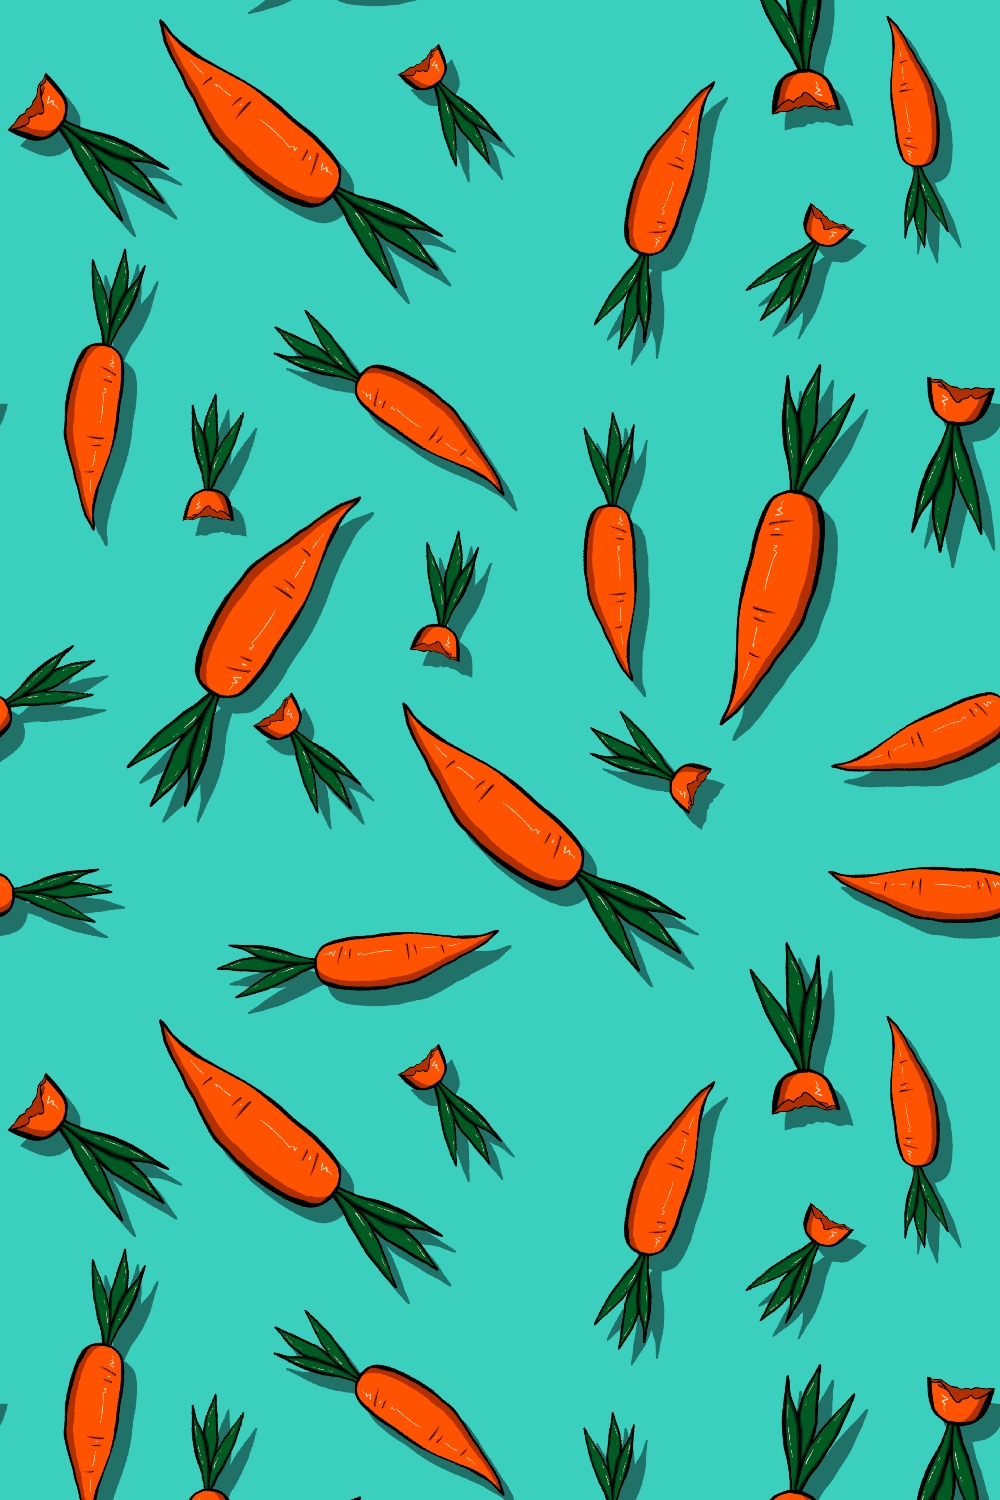 Original Seamless Patterns ‘Farmers Harvest’ with Vegetables